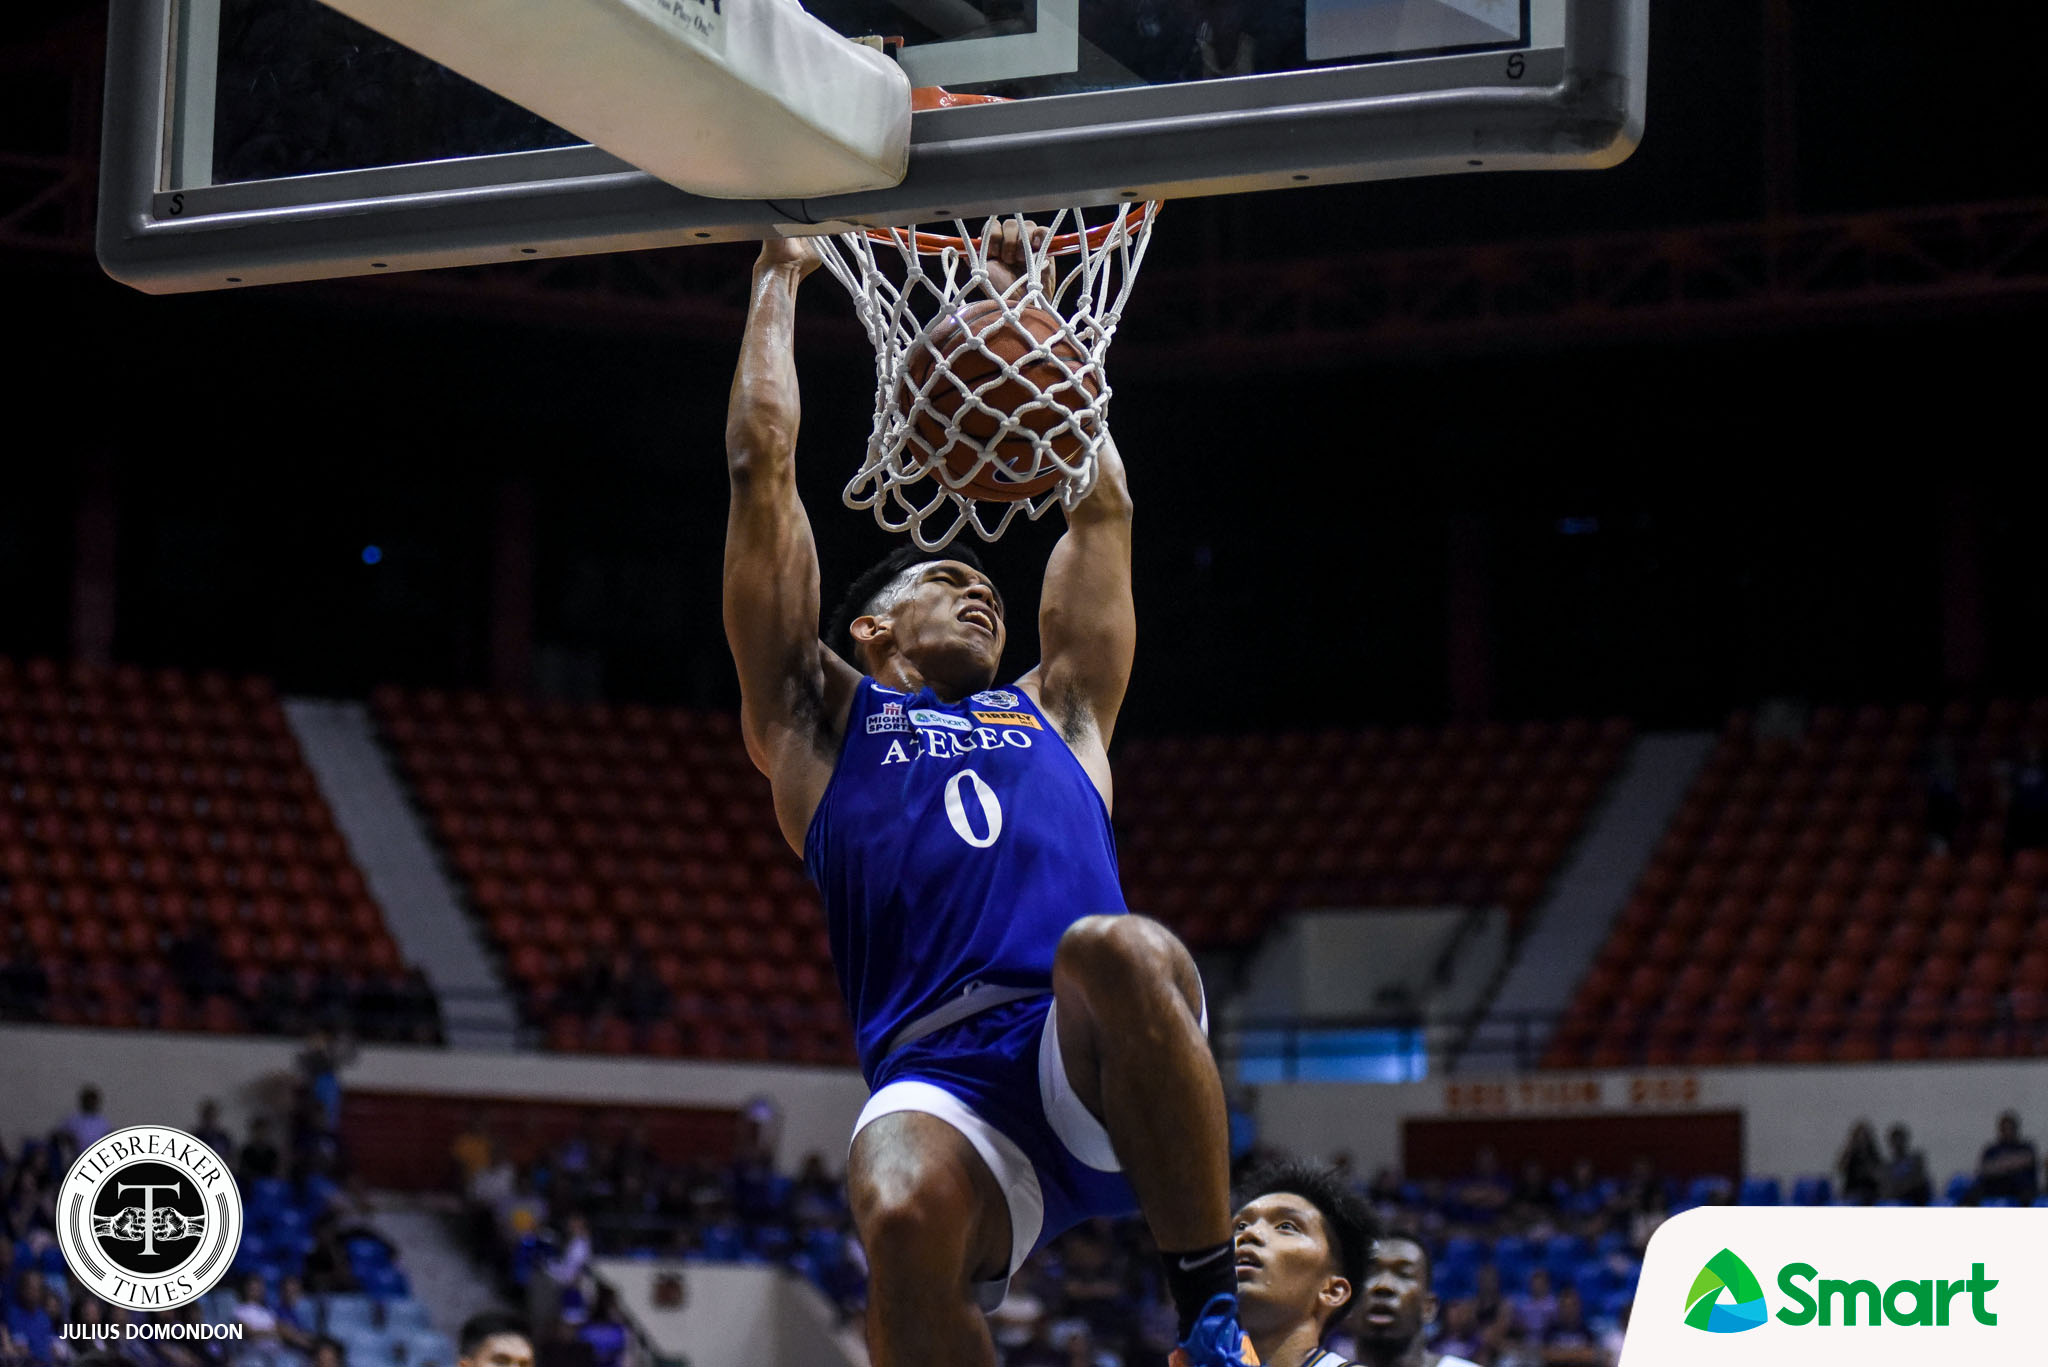 UAAP82-MBB-18TH-PHOTO-ADMU-THIRDY-RAVENA Thirdy Ravena to participate in B.League Slam Dunk contest Basketball News  - philippine sports news